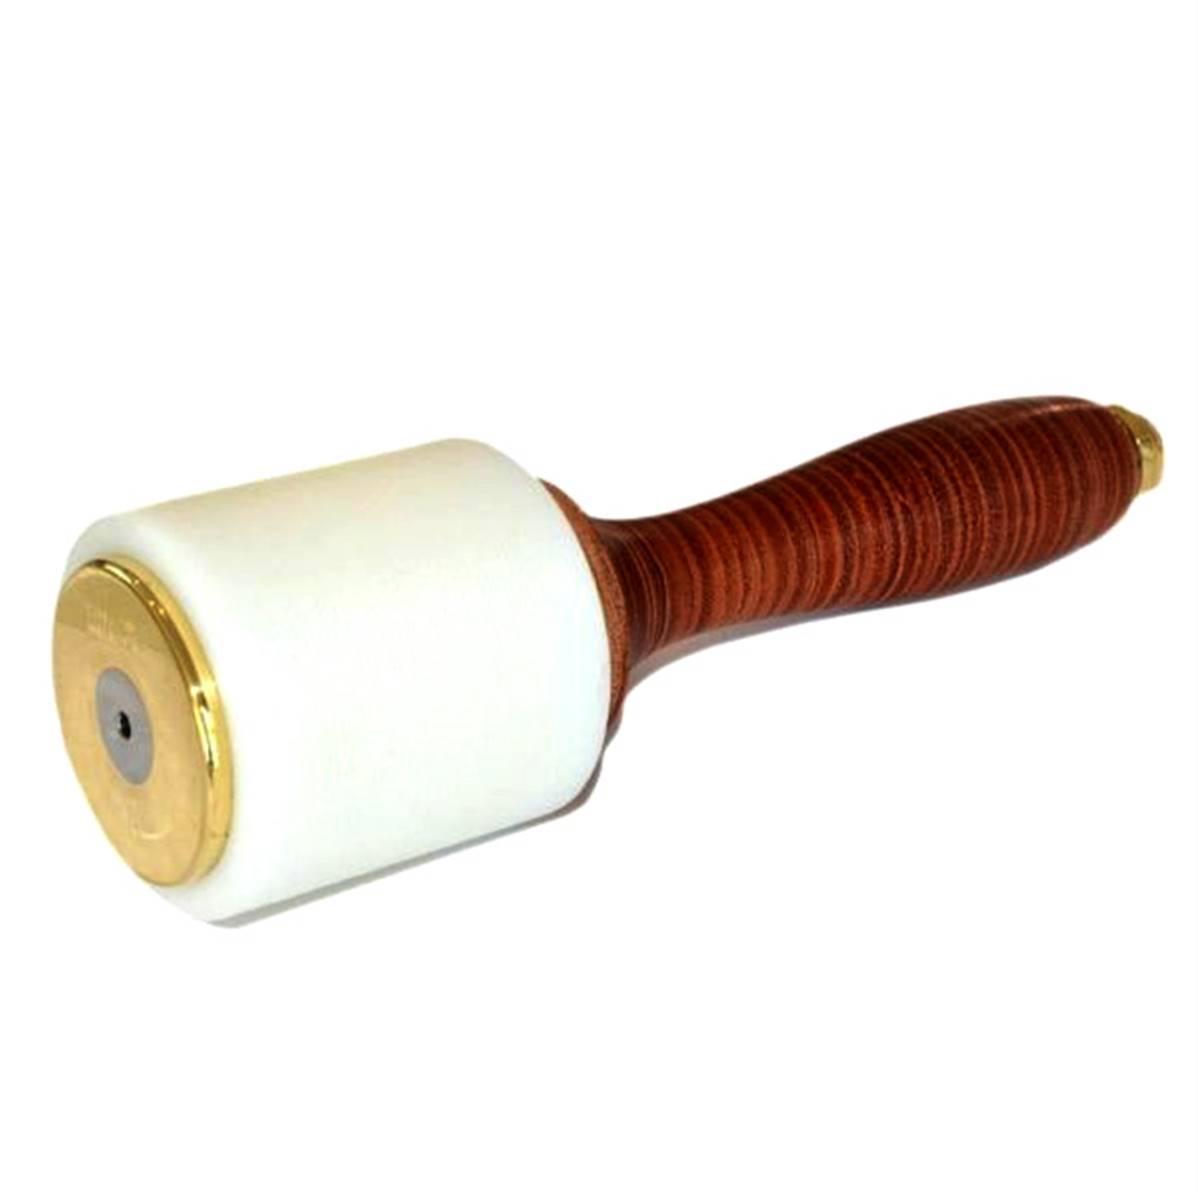 Maillet rond - Round maul - Barry King Tools - 400g (14oz)